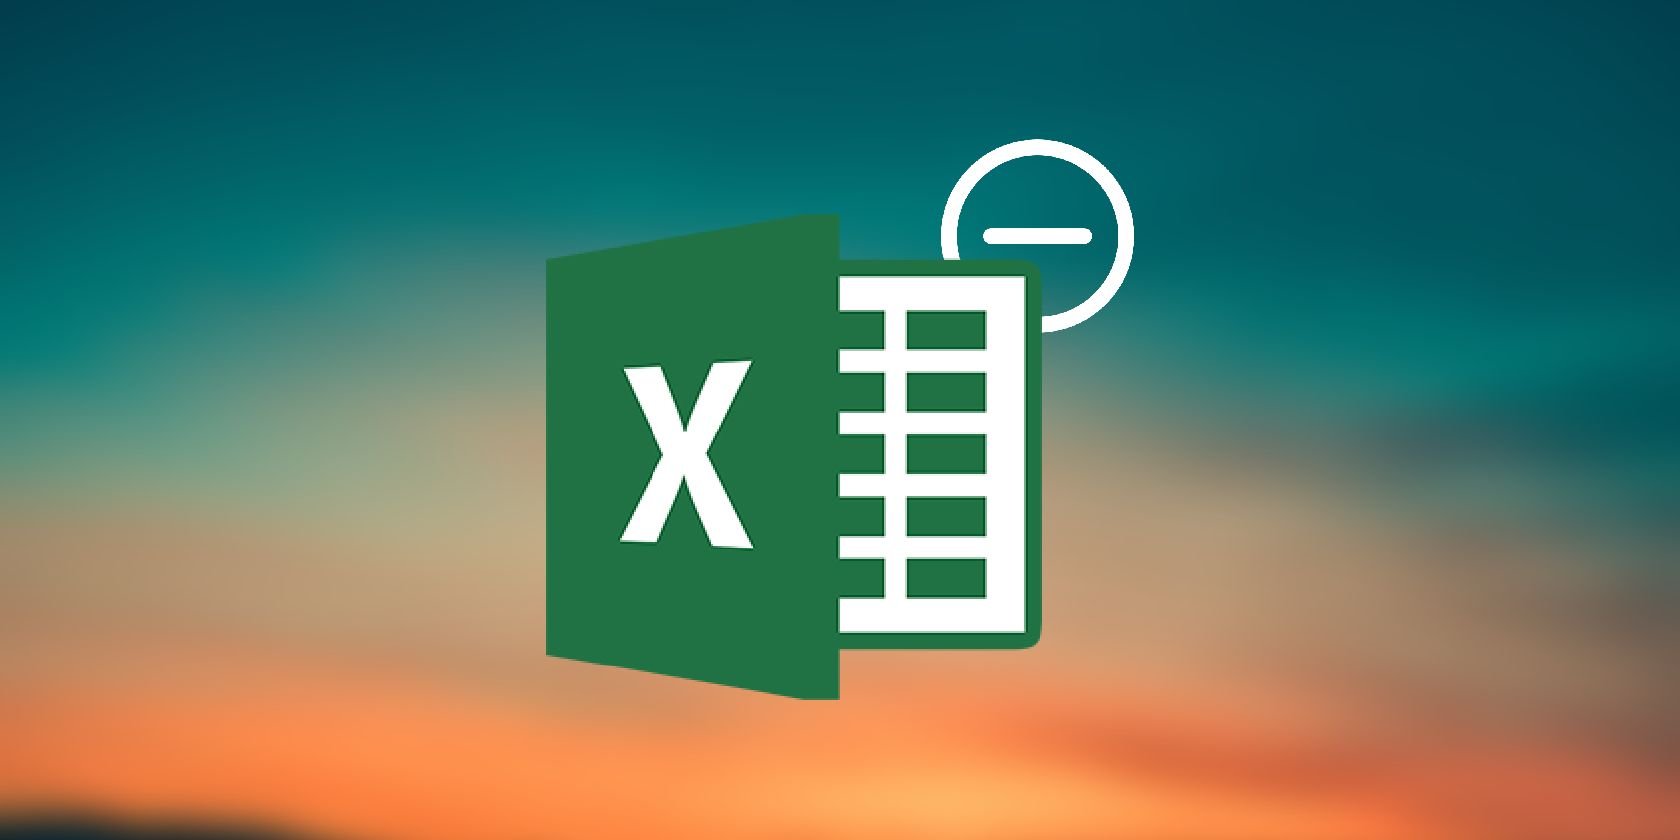 How to Subtract in Excel